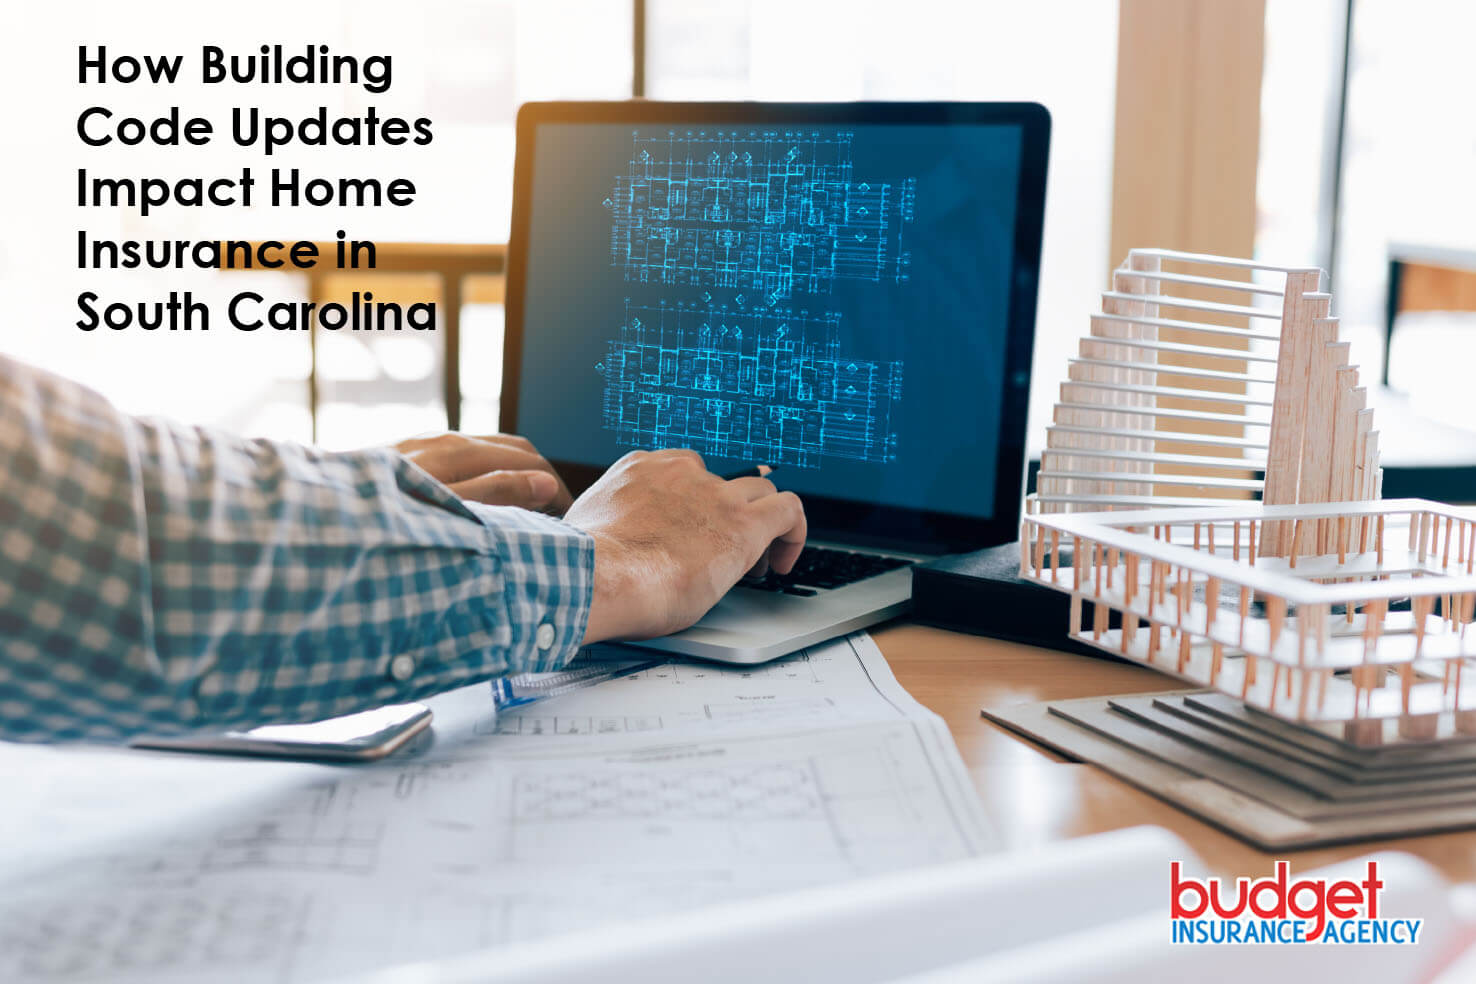 How Building Code Updates Impact Home Insurance in South Carolina